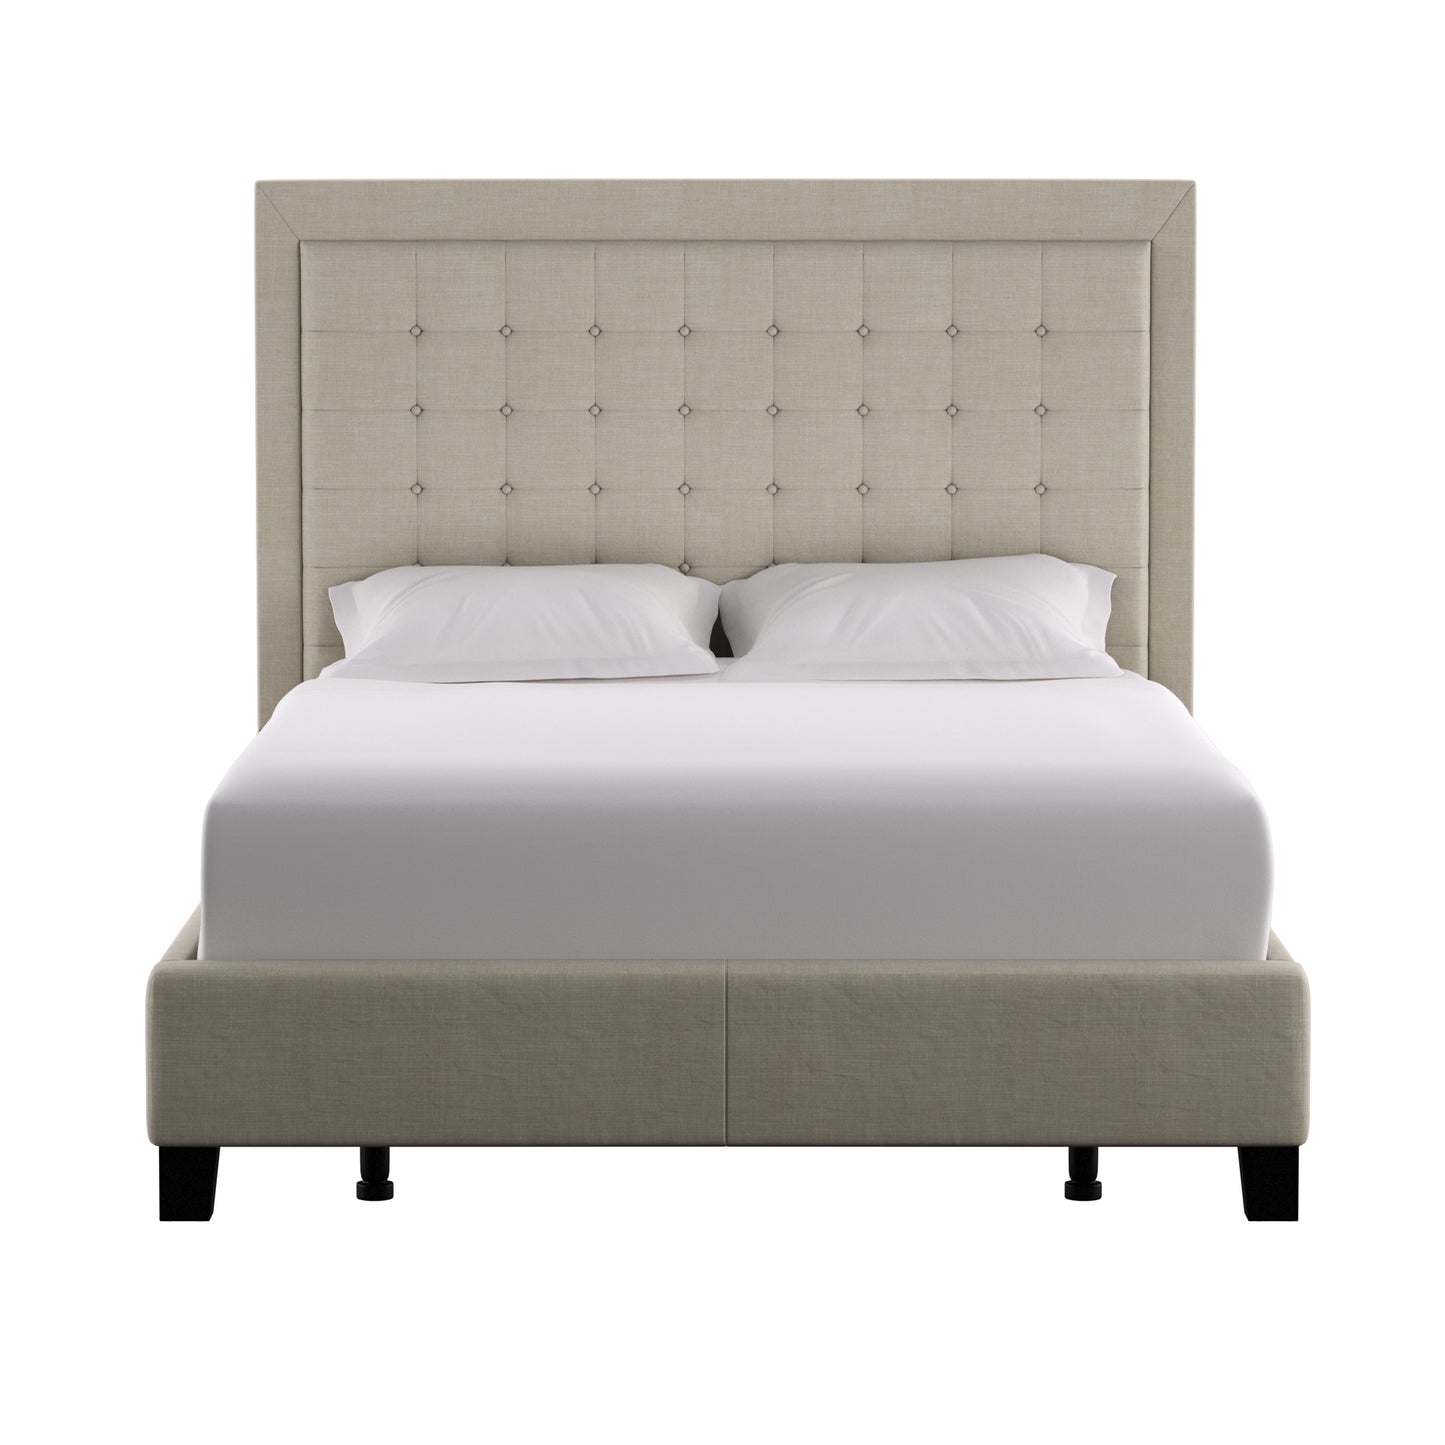 Square Button-Tufted Upholstered Bed - Beige, Full